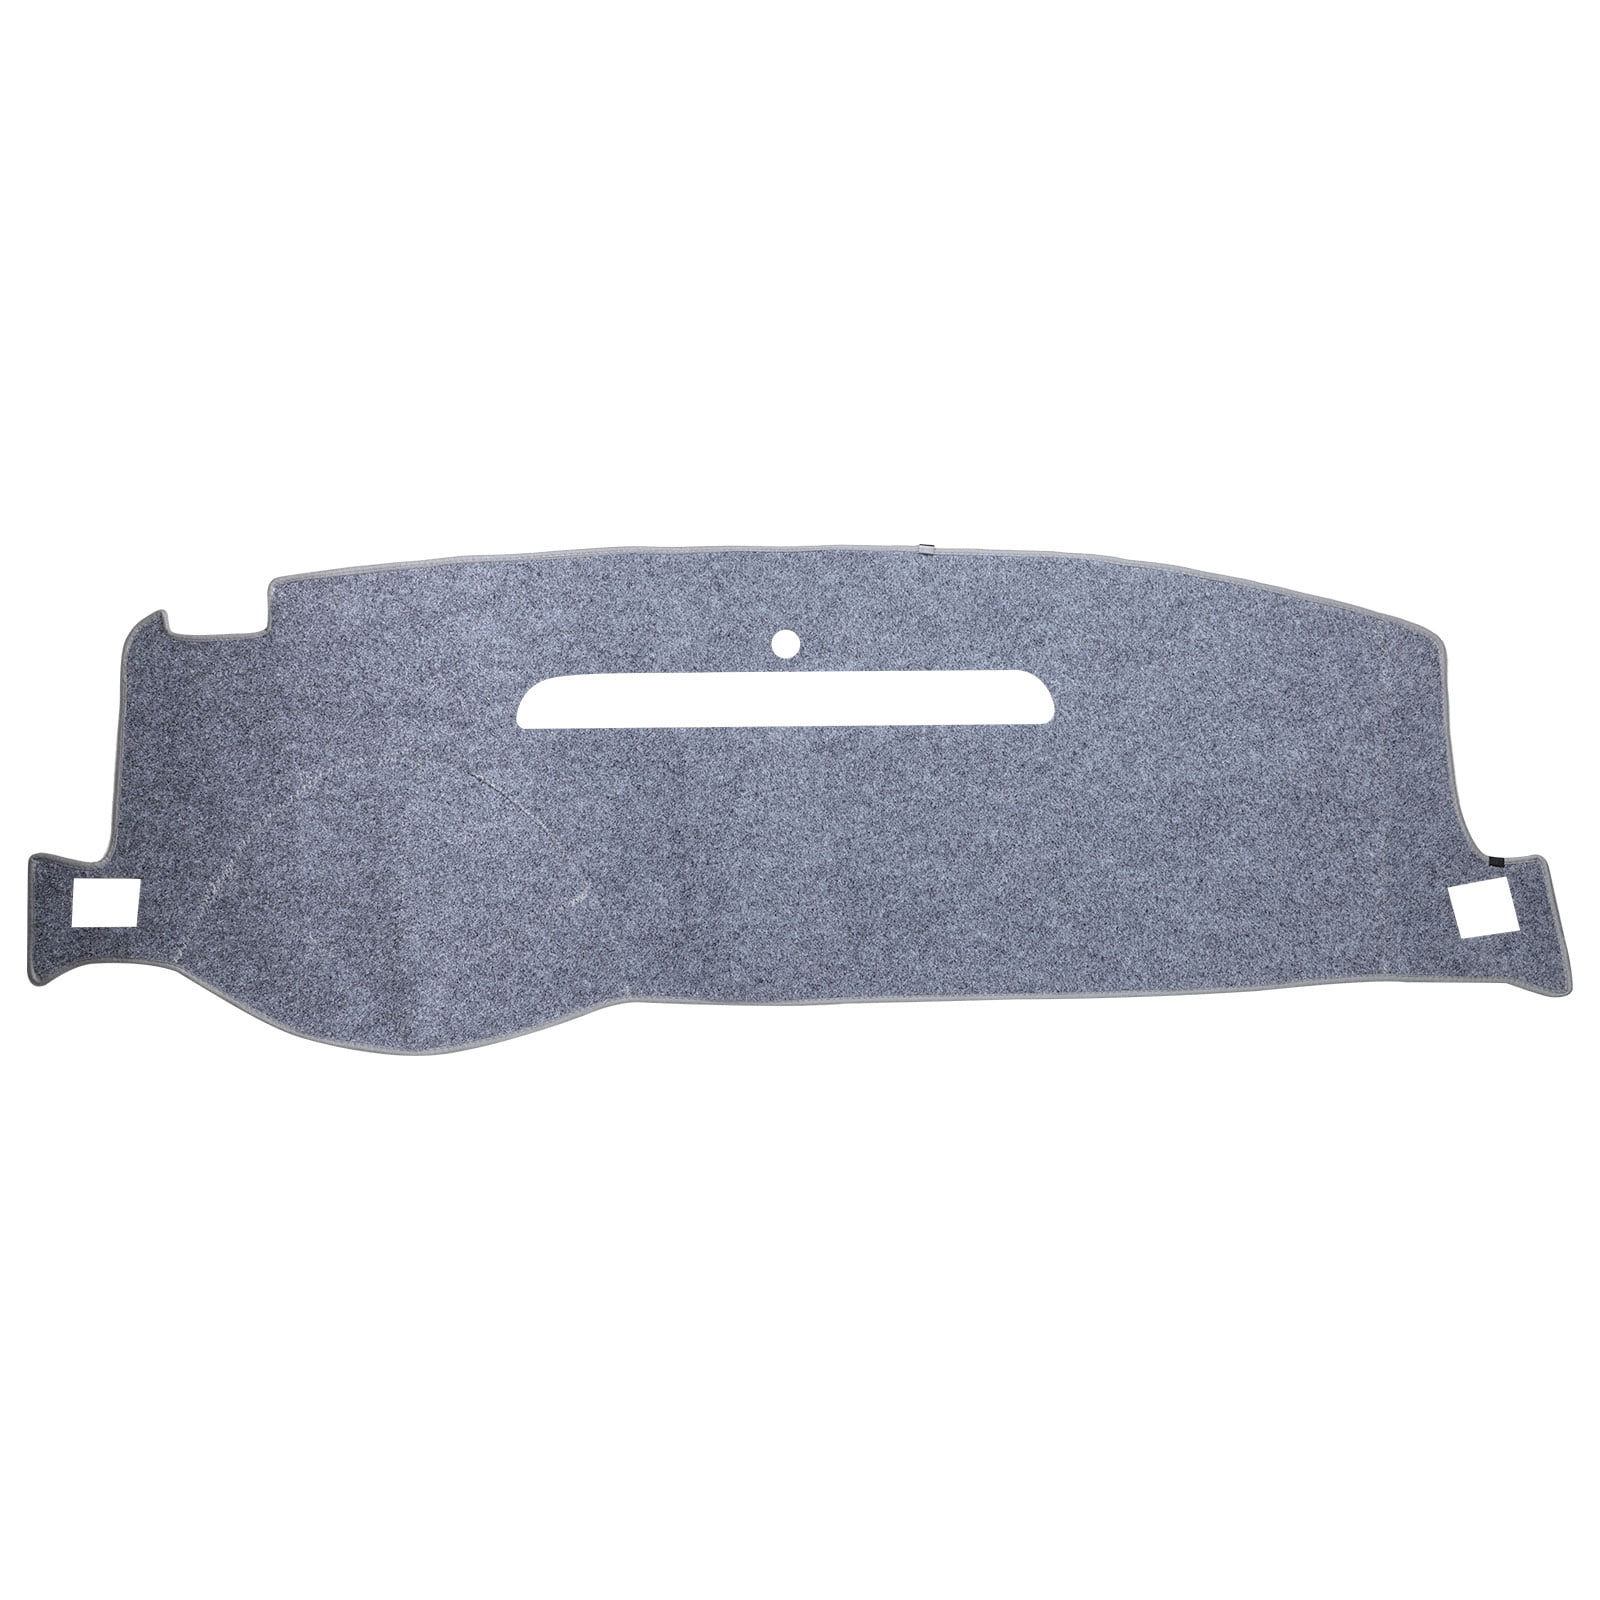 TSV DashMat Carpet Cover for Toyota Camry 20072011, Car Dashboard Pad Dash Cover Mat for 2007